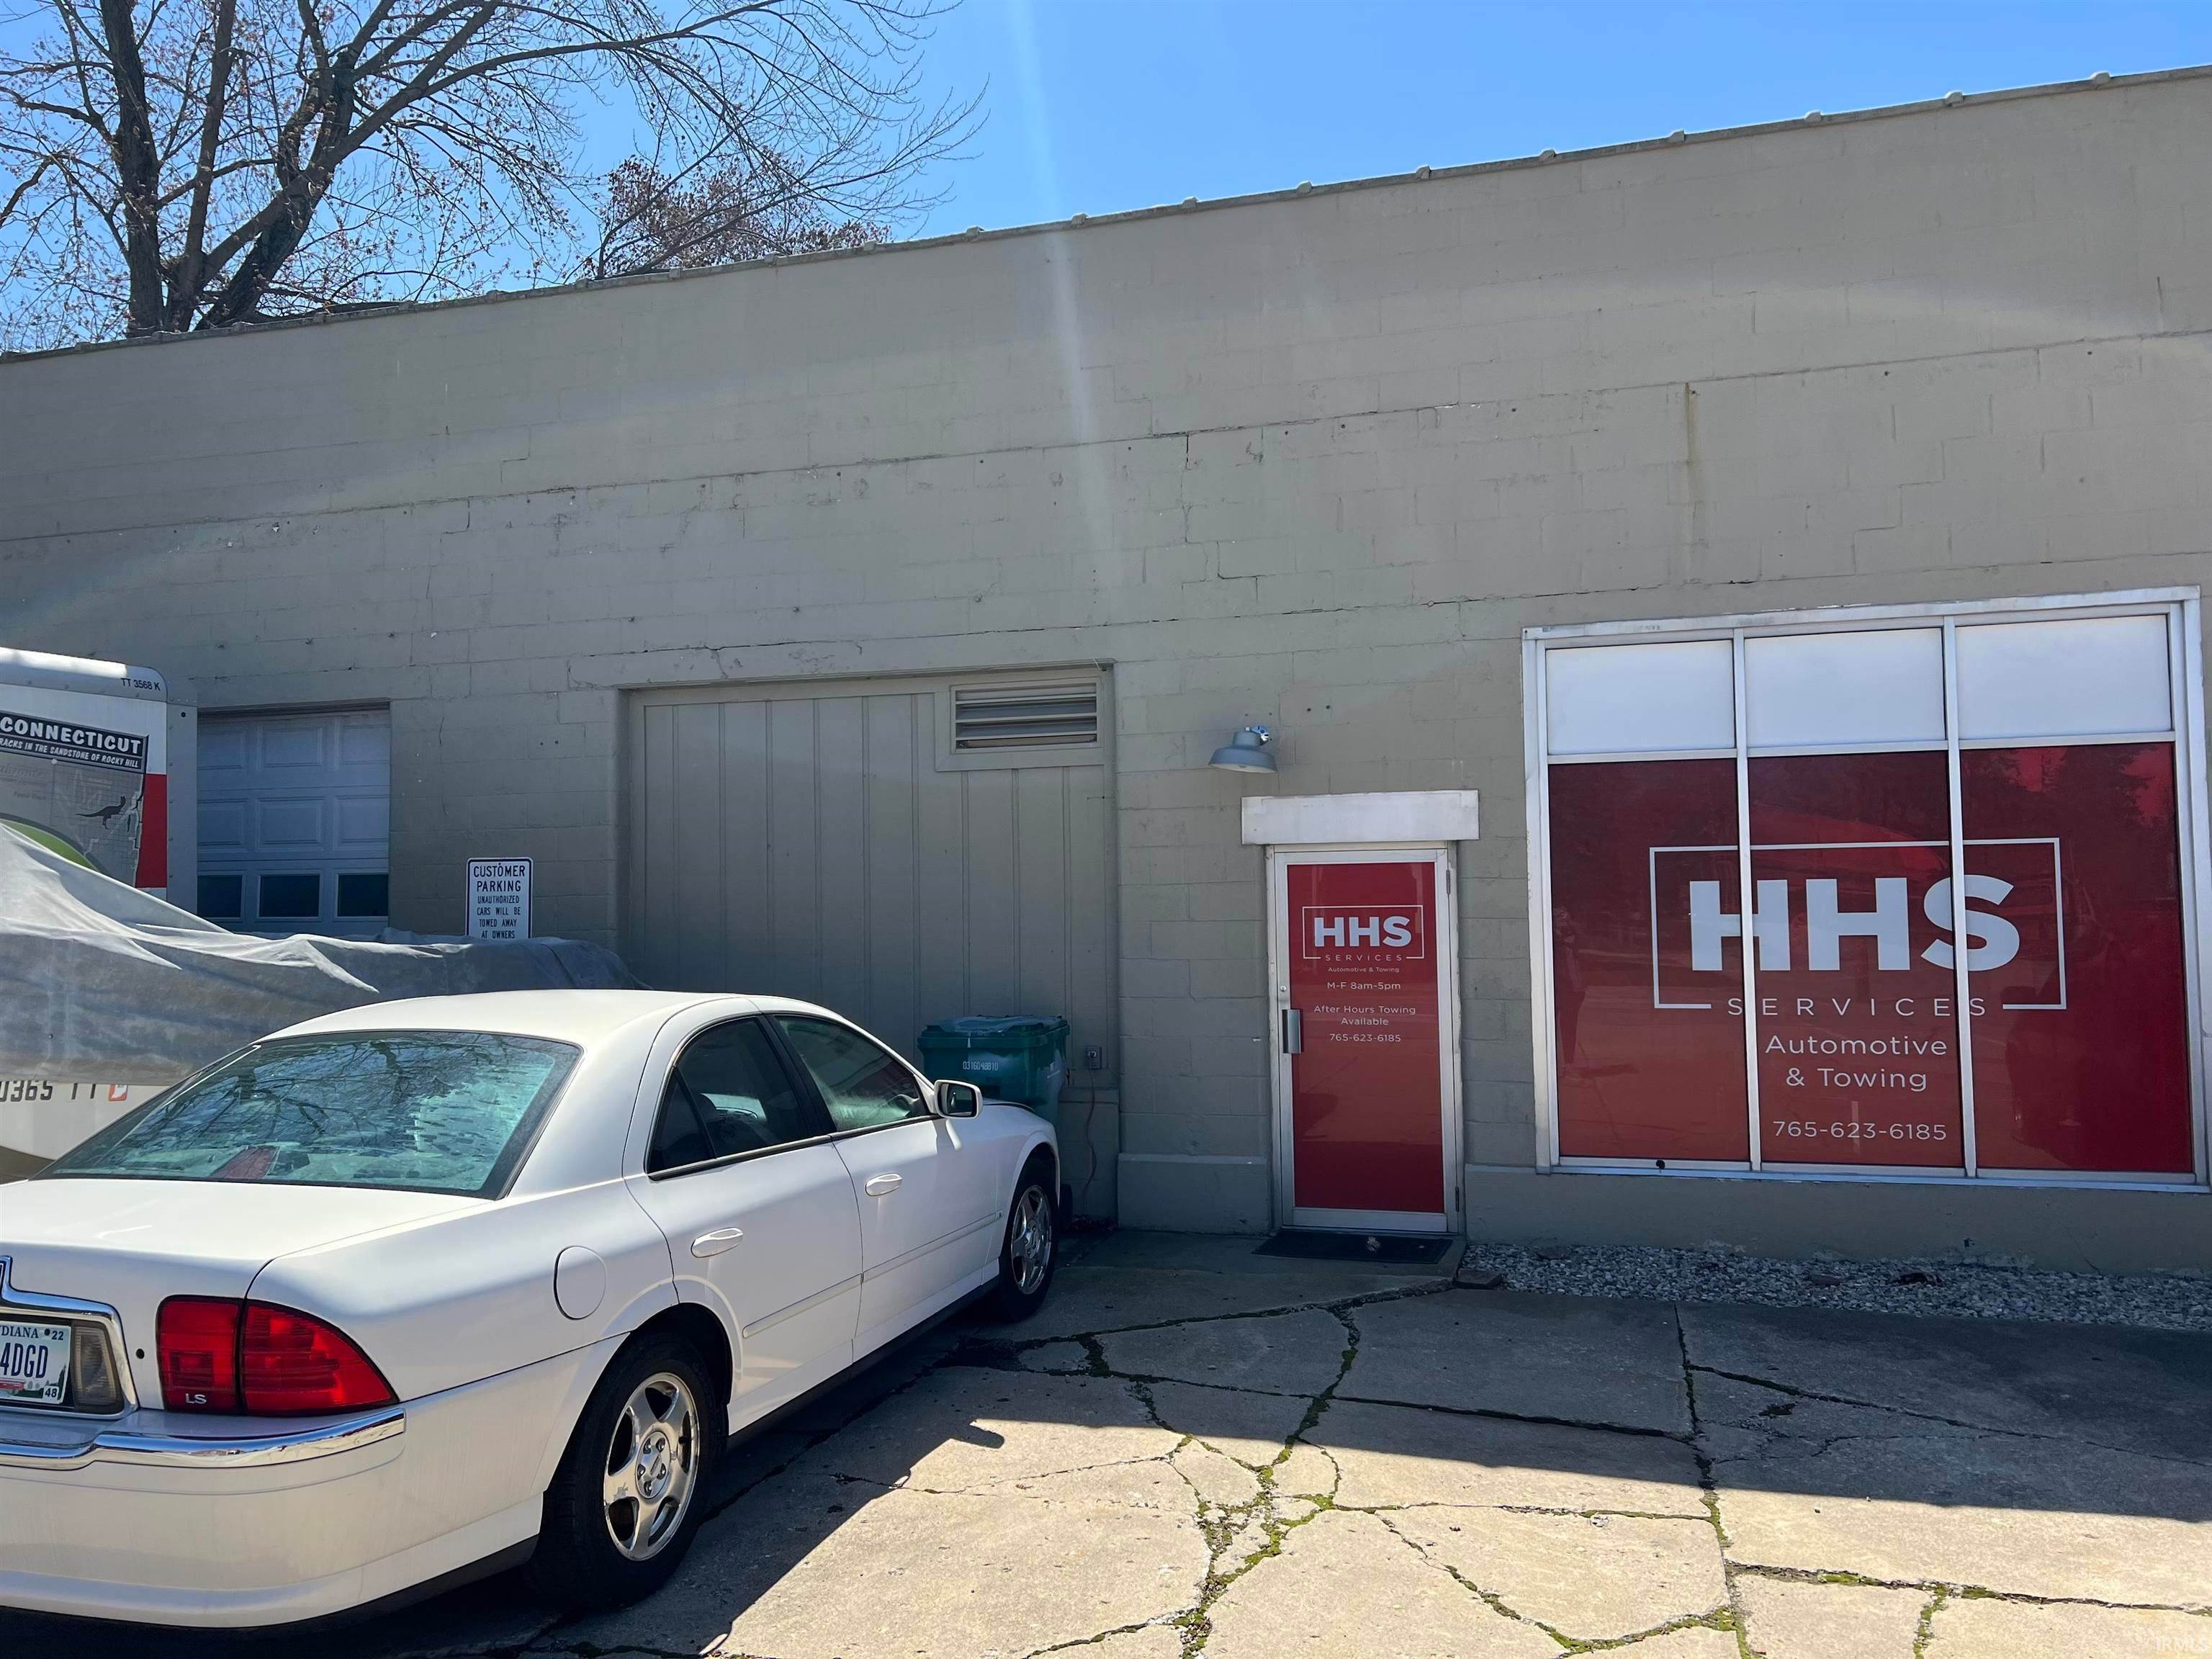 Comm / Ind Lease at 101 E Broadway Street Bunker Hill, Indiana 46914 United States